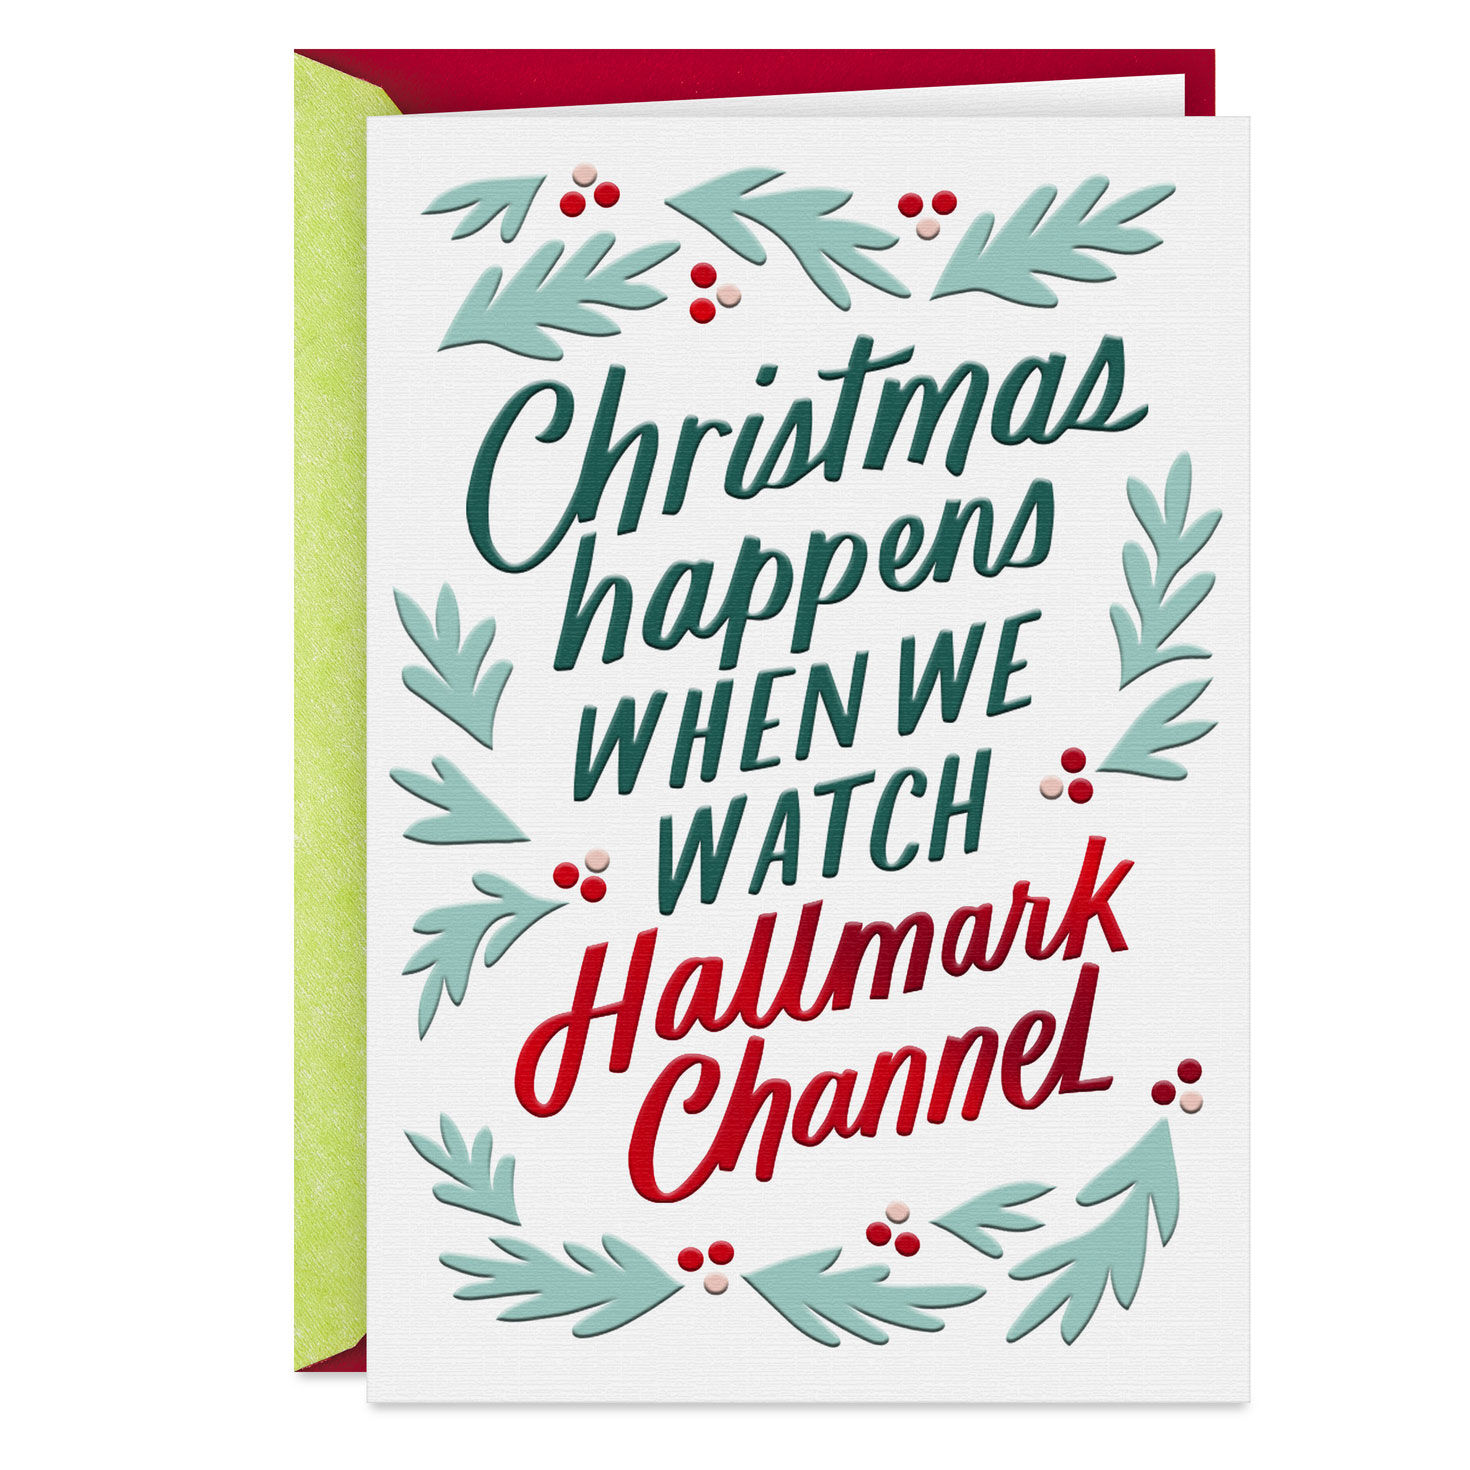 Hallmark Channel Popcorn, Movies and Happiness Christmas Card for only USD 3.99 | Hallmark